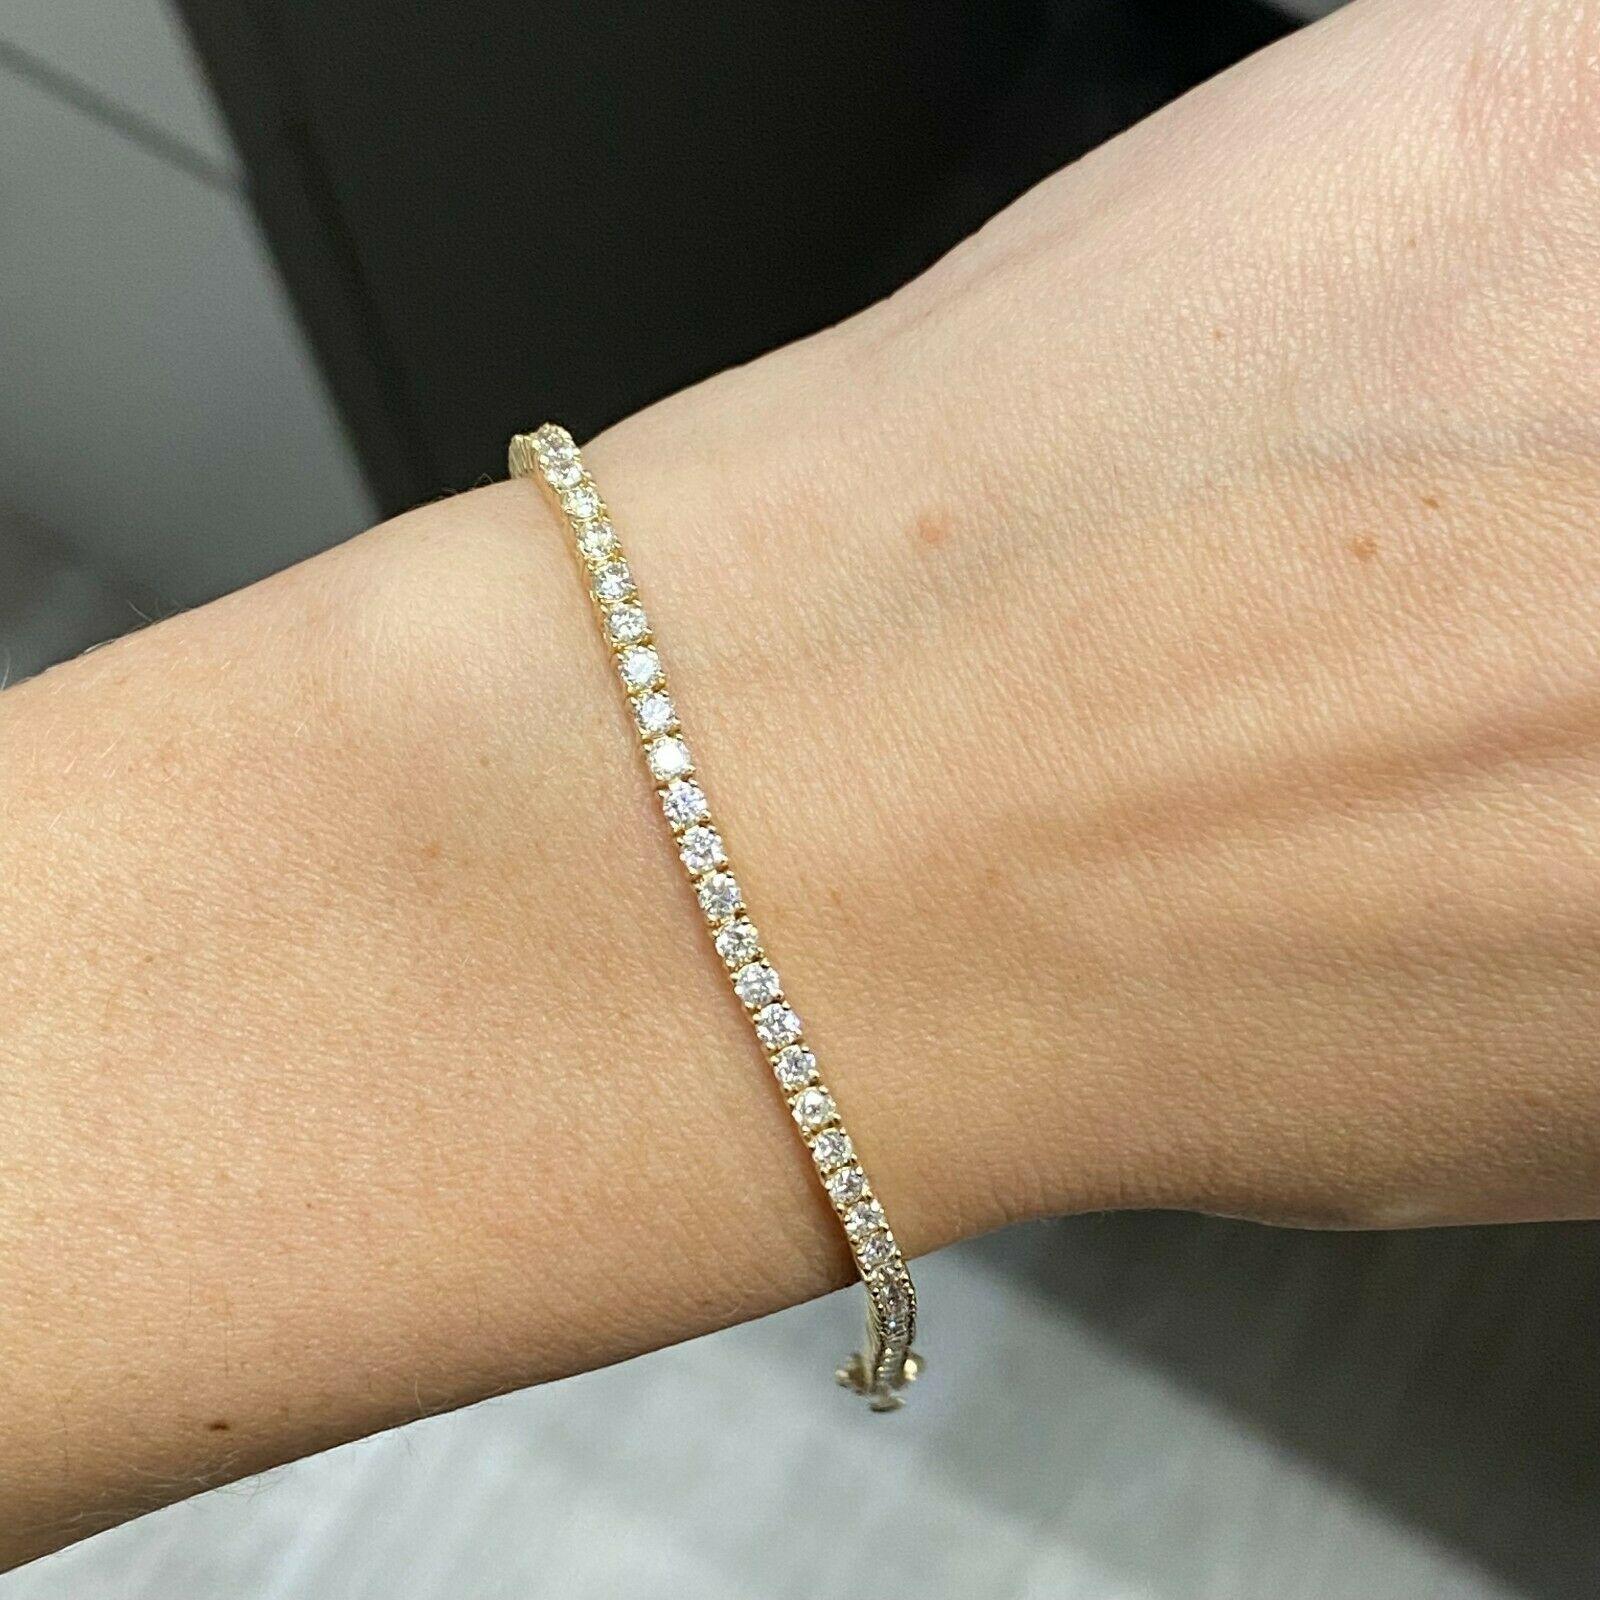 14k Yellow Gold Diamond Tennis Bracelet Weighing 3.25 CTW In New Condition For Sale In Los Angeles, CA